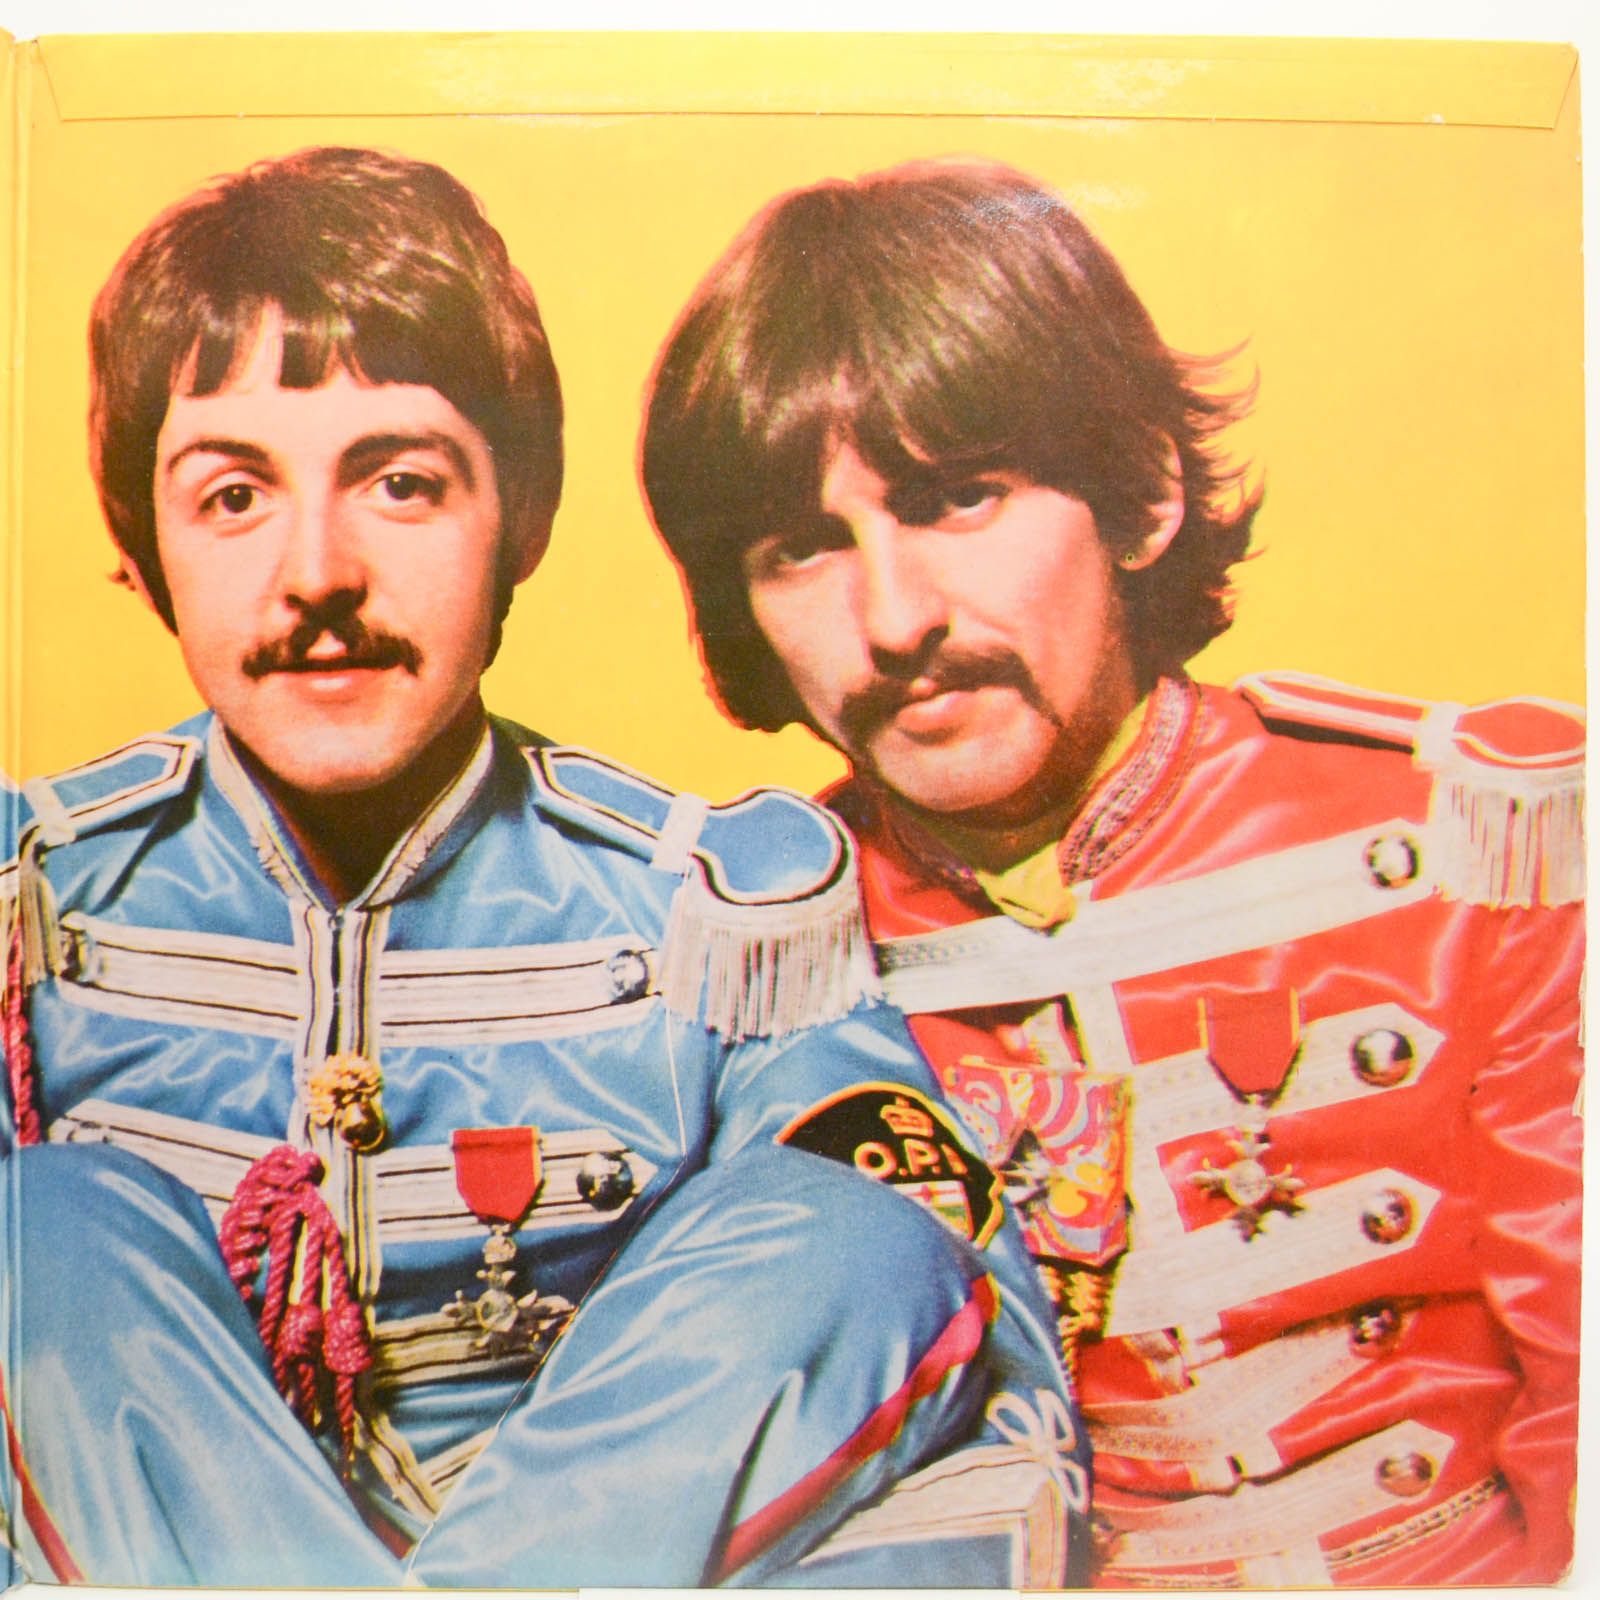 Beatles sgt peppers lonely hearts club. The Beatles Sgt. Pepper`s Lonely Hearts Club Band 1967. Sgt Pepper s Lonely Hearts Club Band. Битлз сержант Пеппер. Битлз Sgt Pepper s Lonely Hearts Club Band.